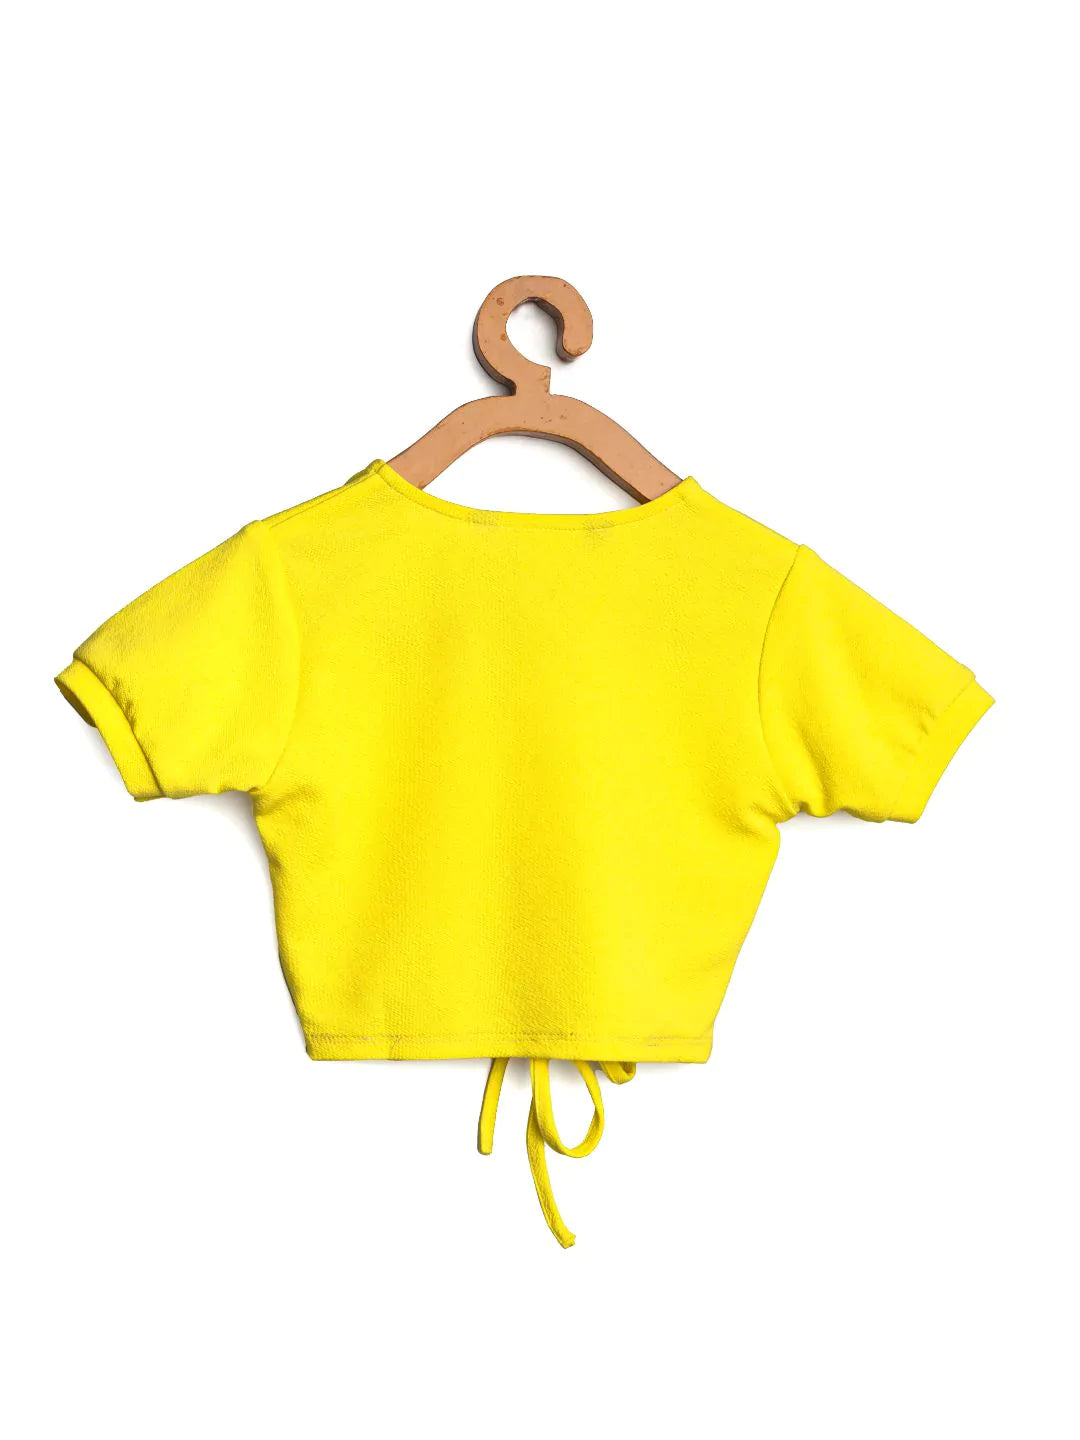 Cotton Stretchable Front Drawstring Crop Top For Girls - Uptownie